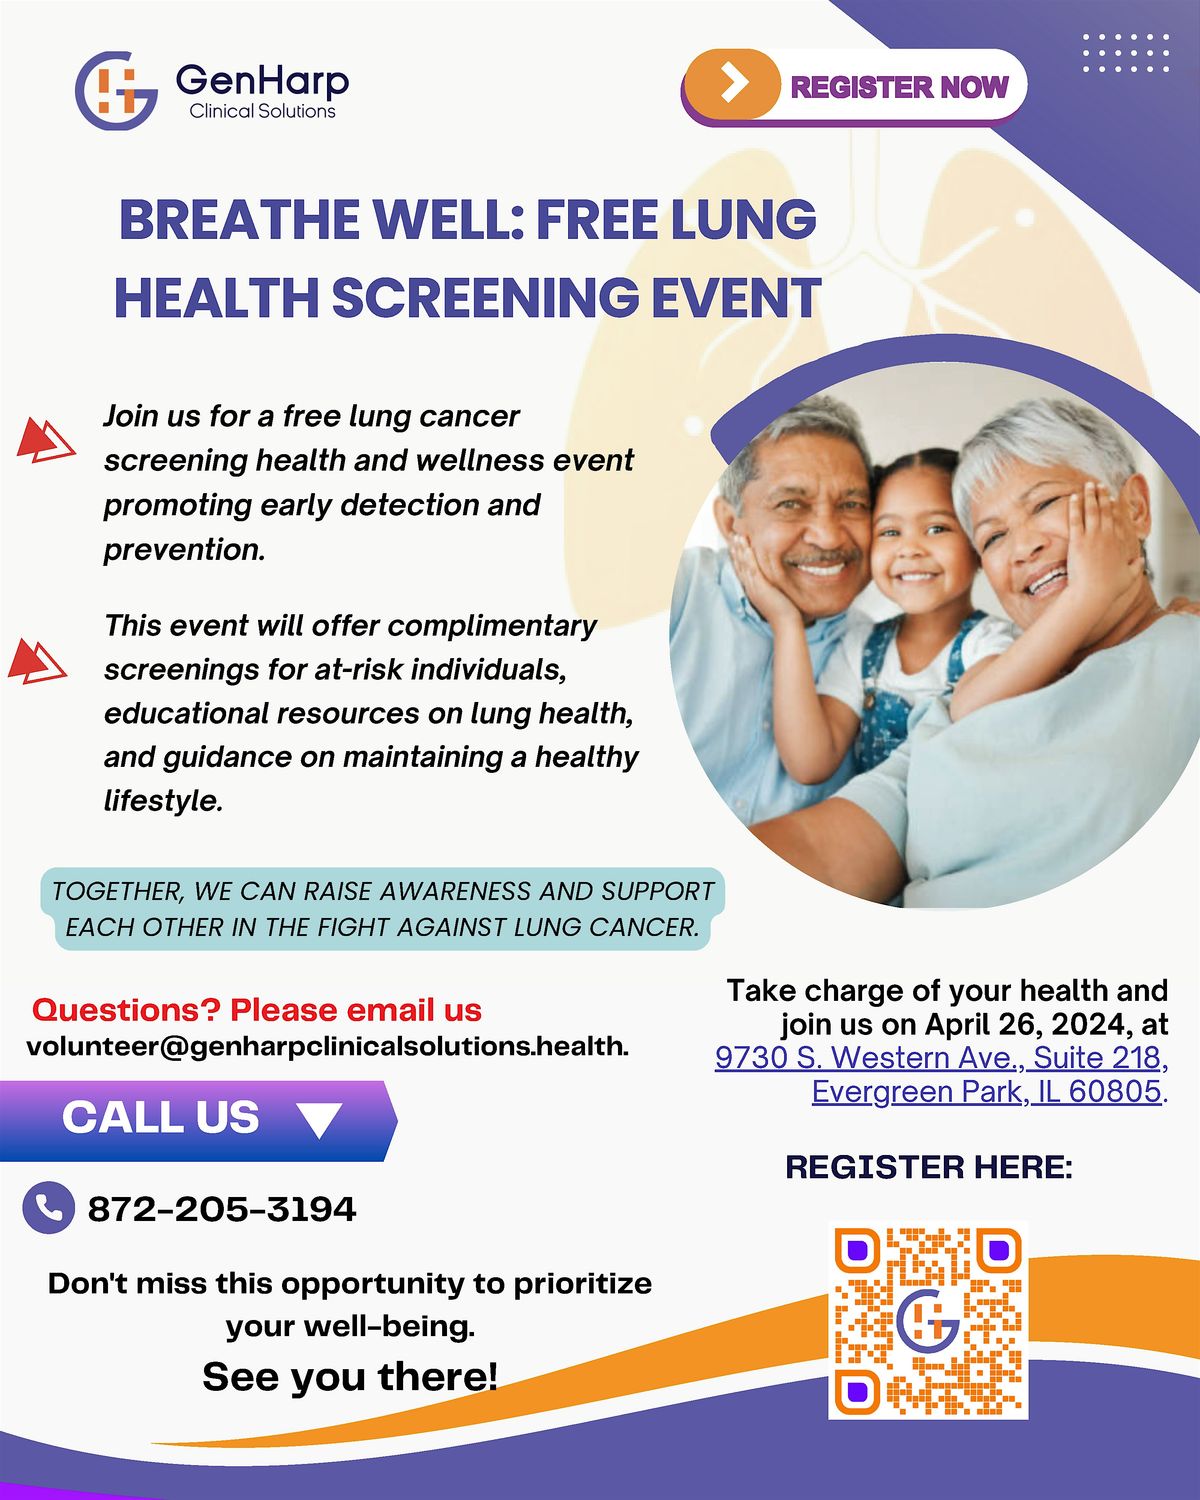 Breathe Well: Free Lung Health Screening Event